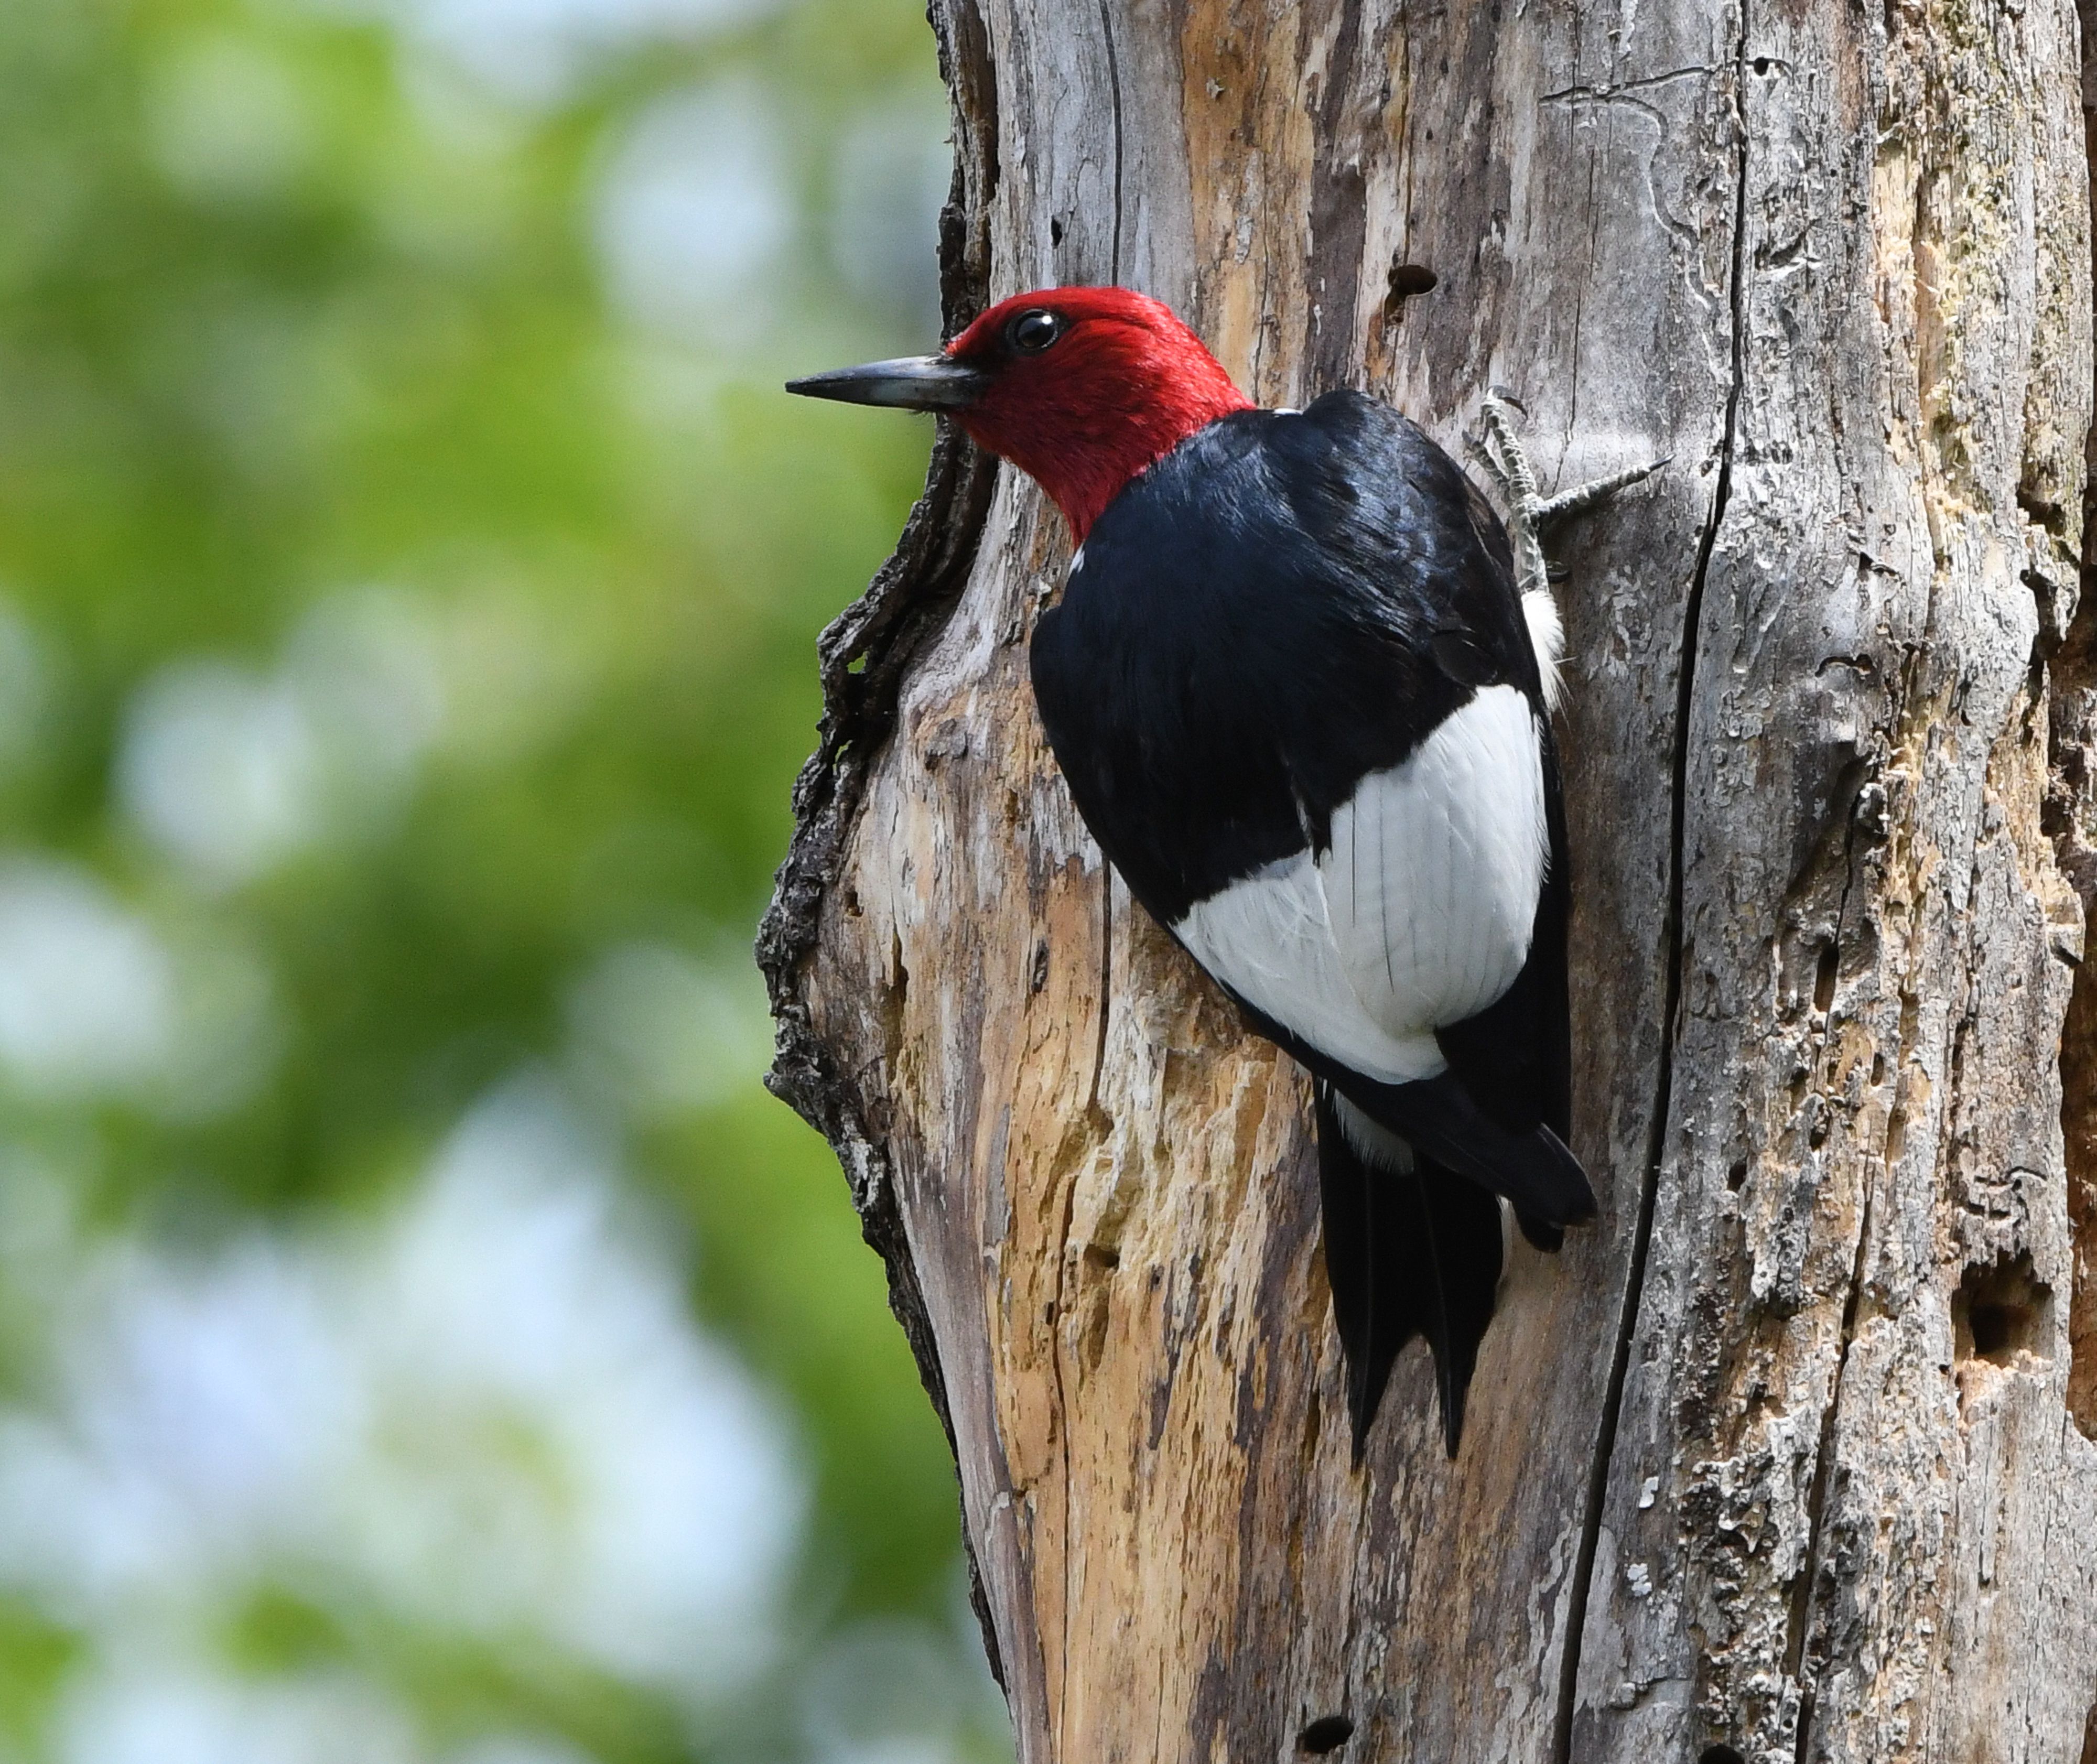 Red-headed woodpecker perched on a tree